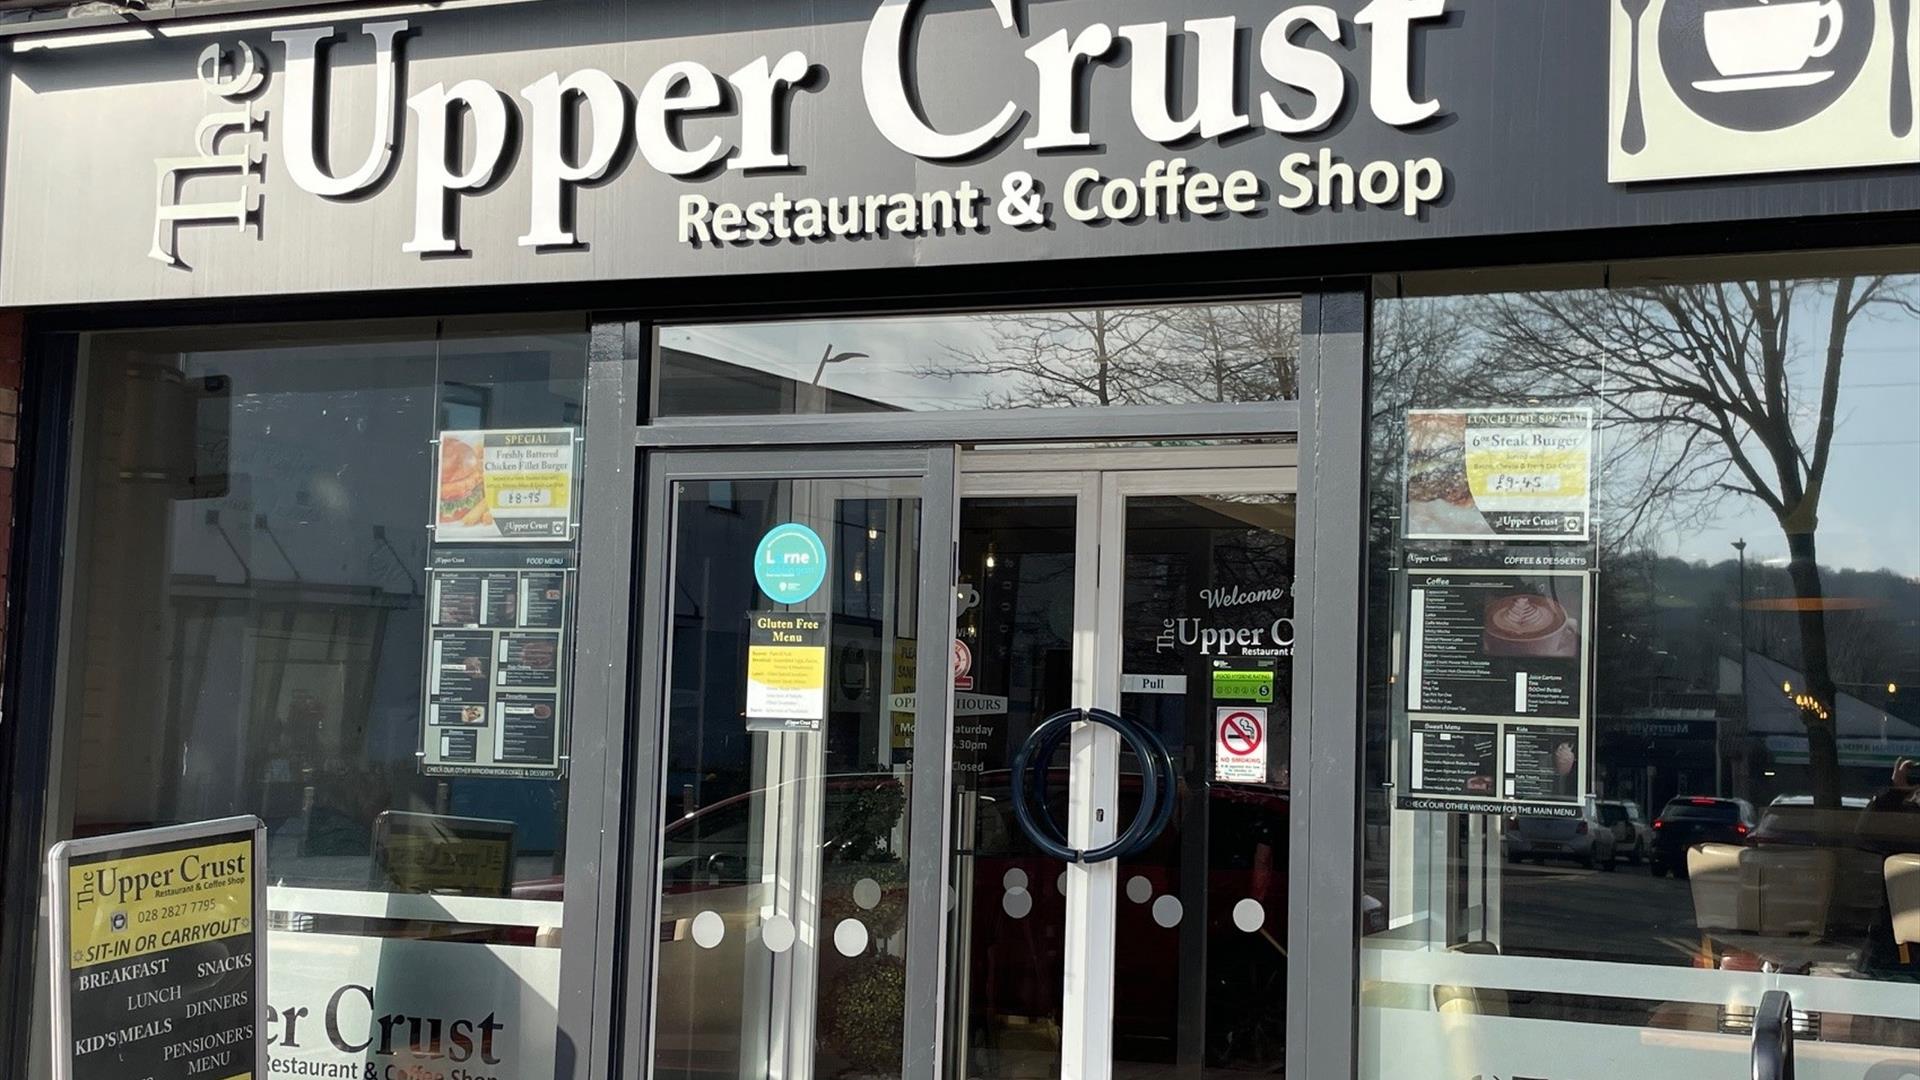 Exterior of Upper Crust restaurant and coffee shop with entrance doors and windows